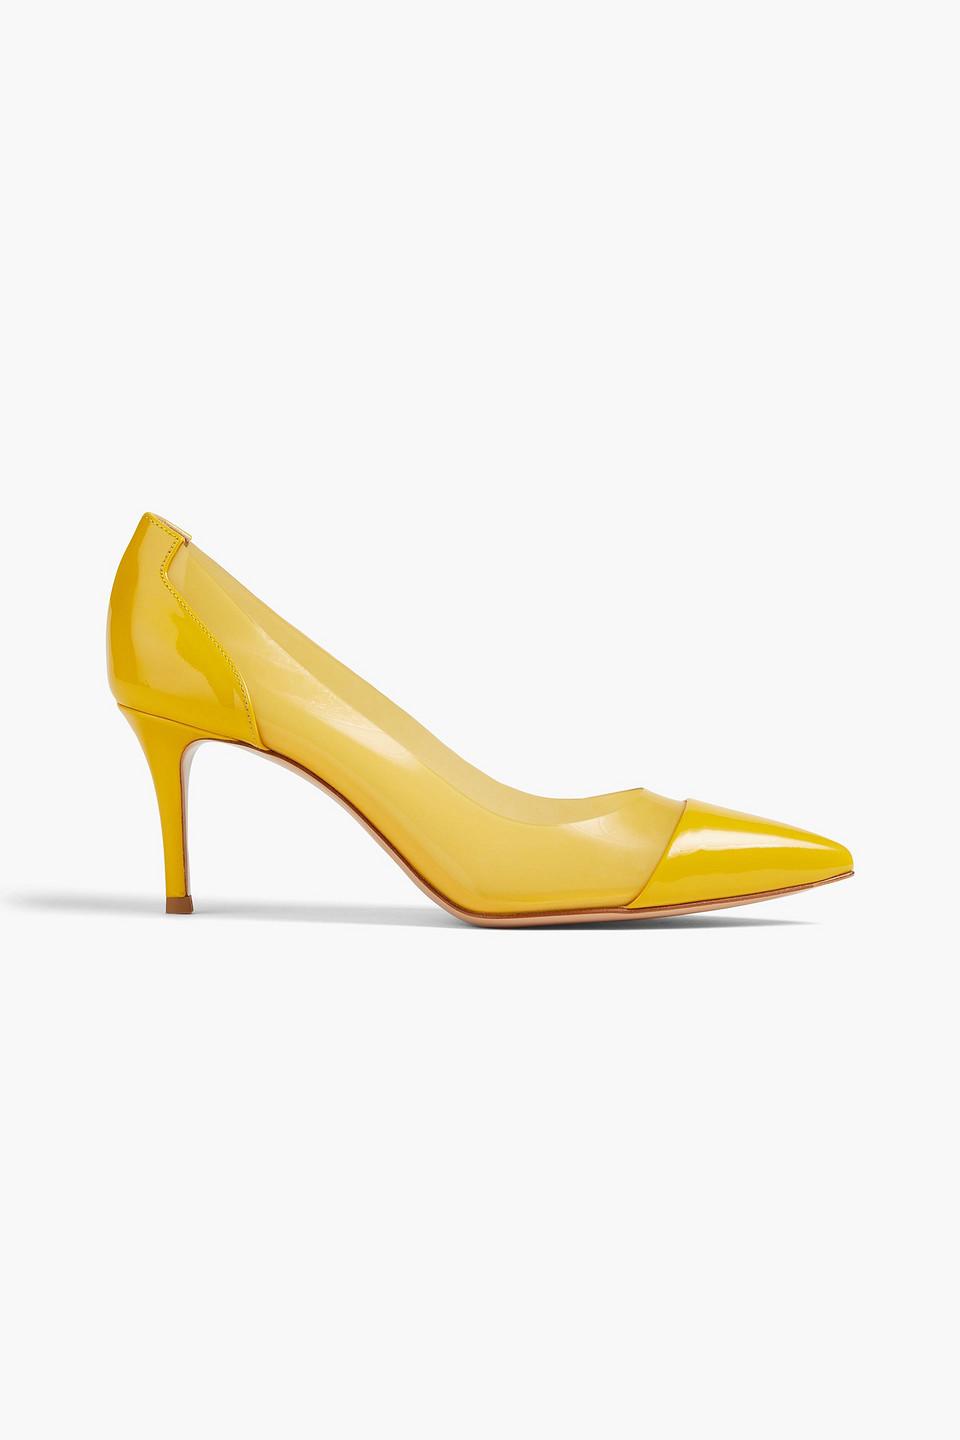 Gianvito Rossi Patent-leather And Pvc Pumps in Yellow | Lyst UK